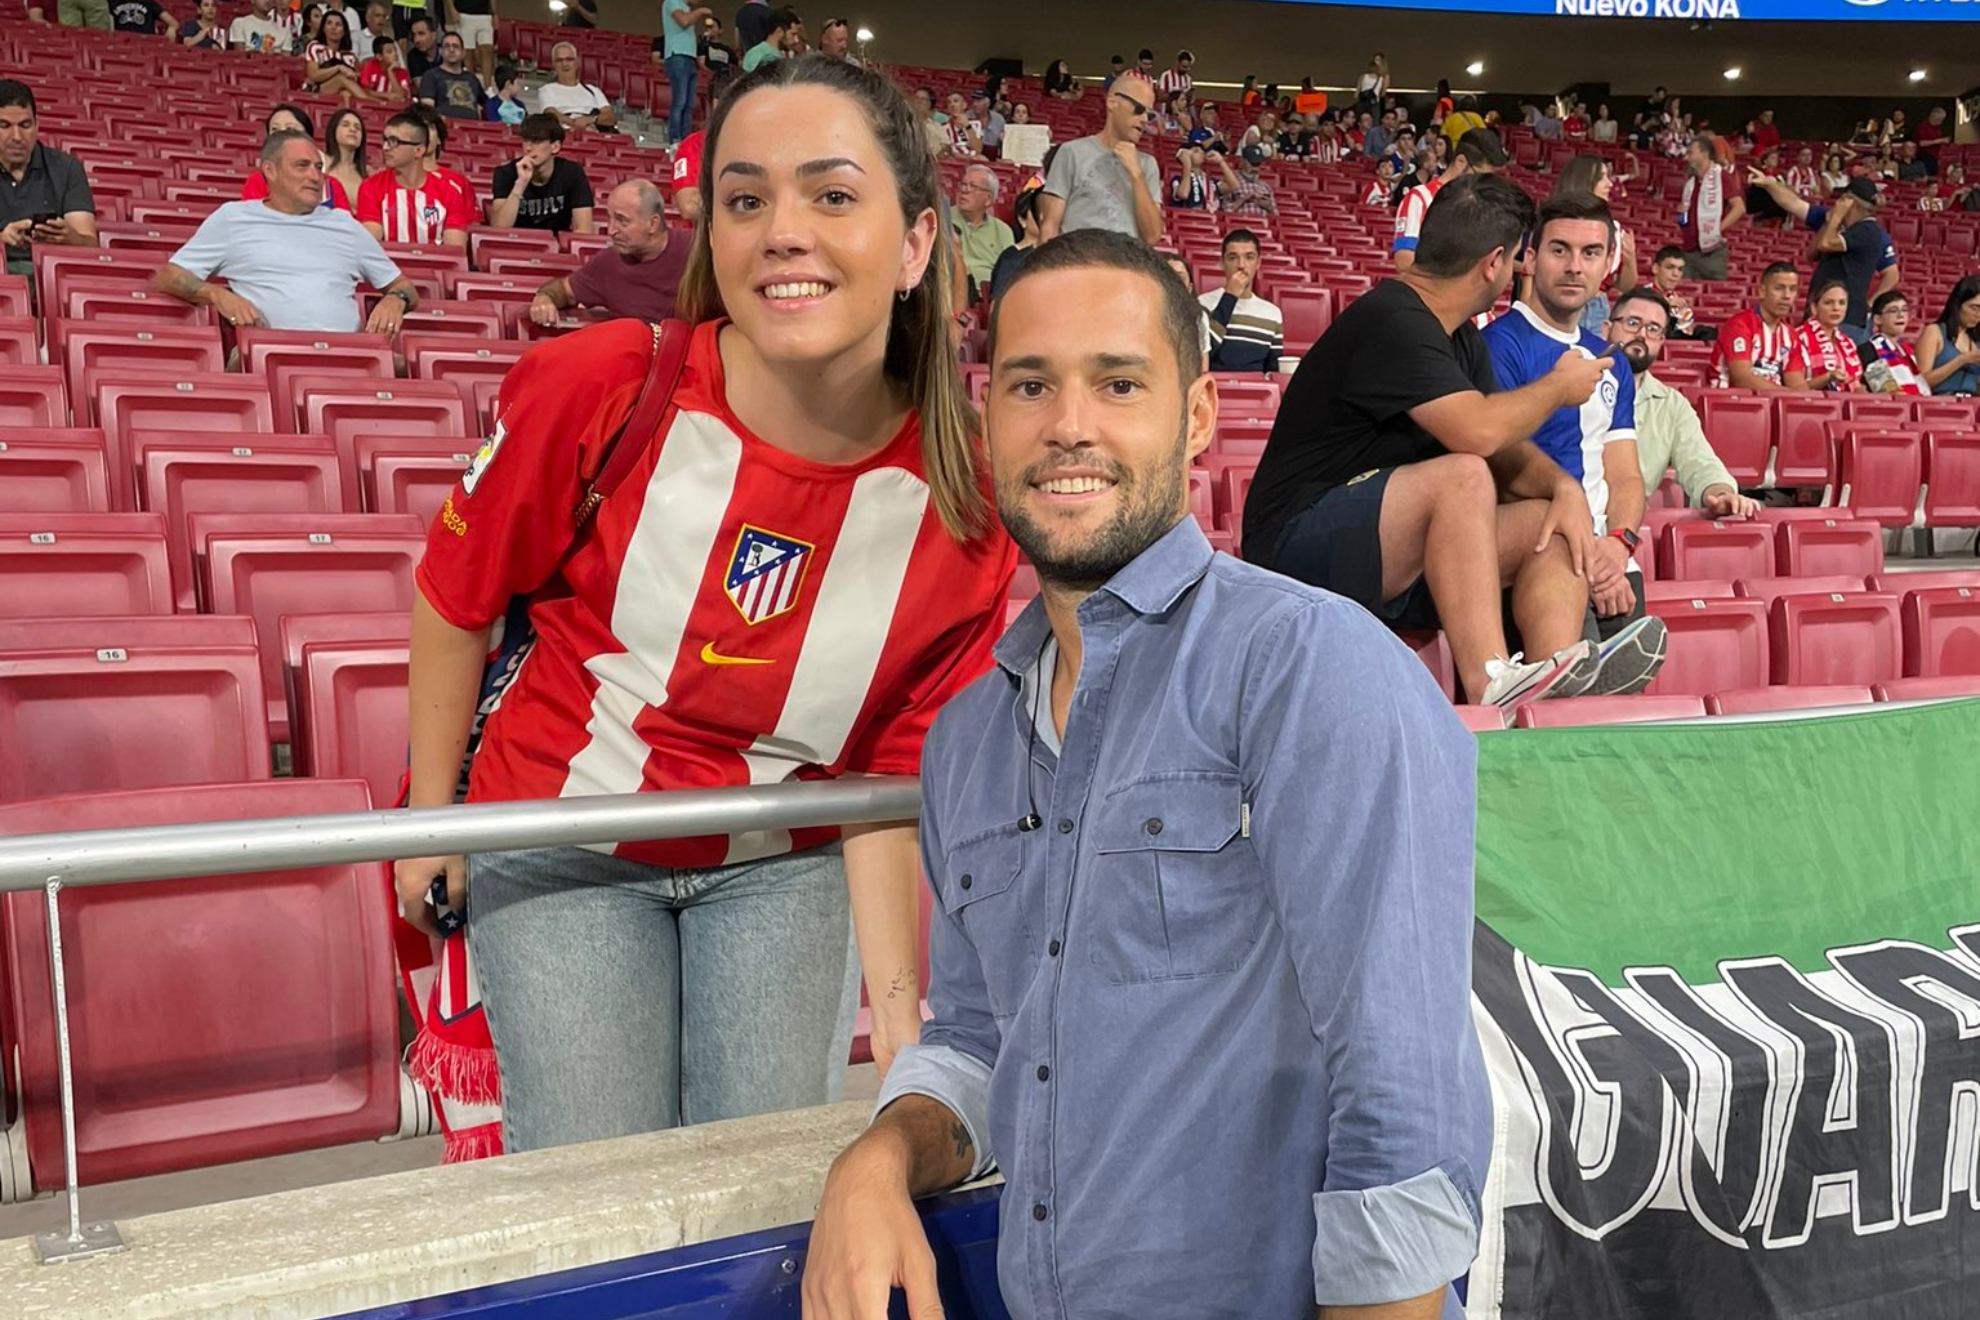 The luck that led a fan to meet one of her Atletico Madrid idols: Mario Suarez